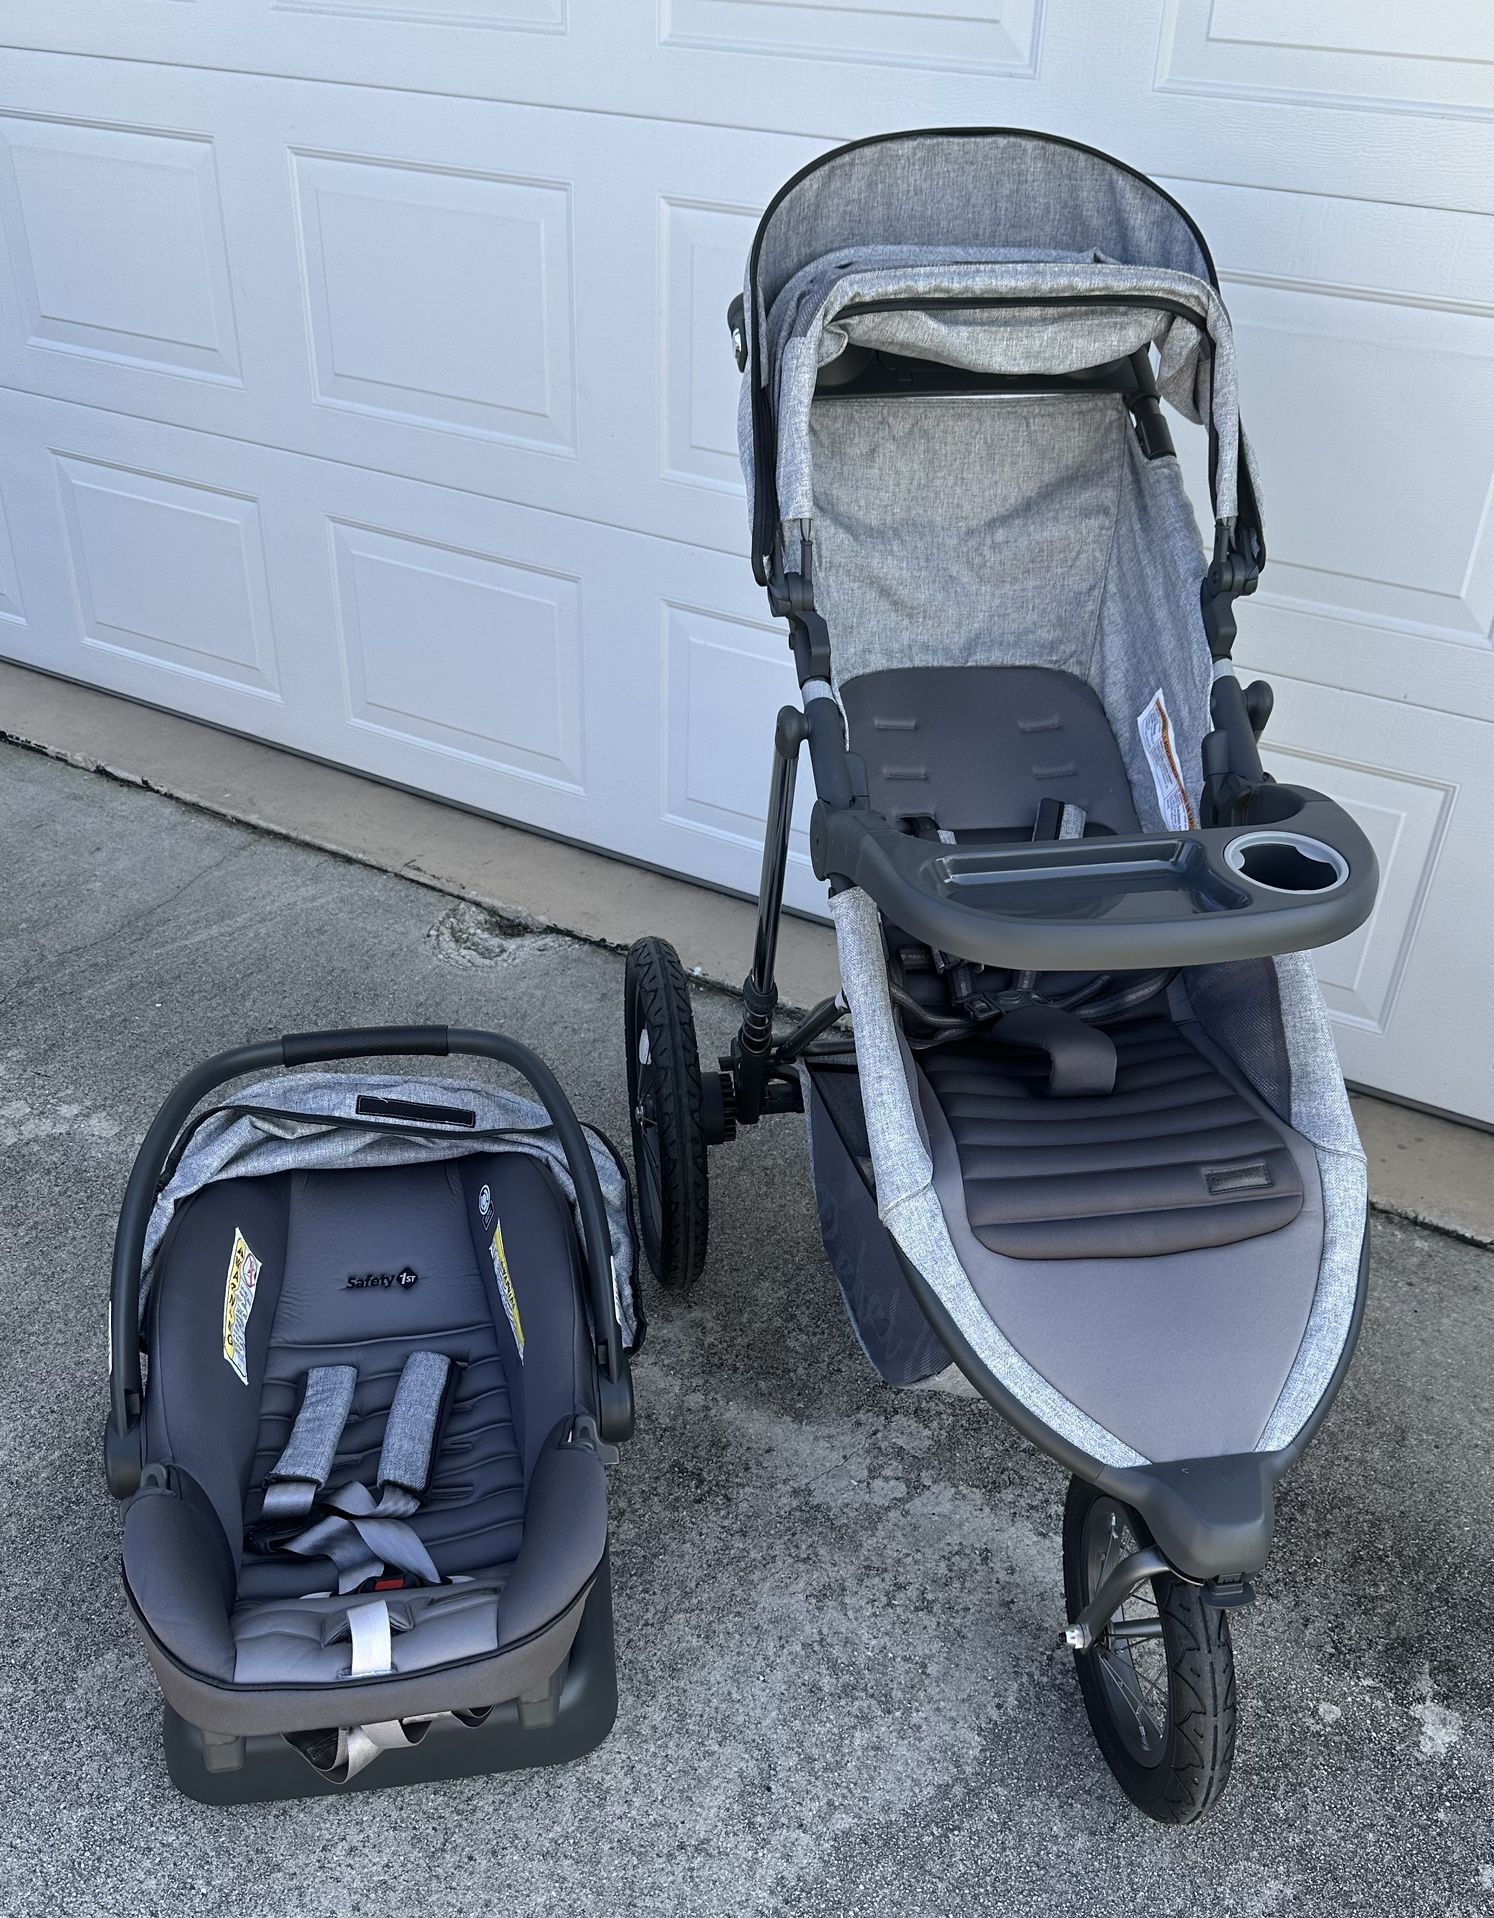 EXCELLENT CONDITION - Monbebe Rebel II  All in One Travel System Stroller with Rear-Facing Infant Car Seat, Soho